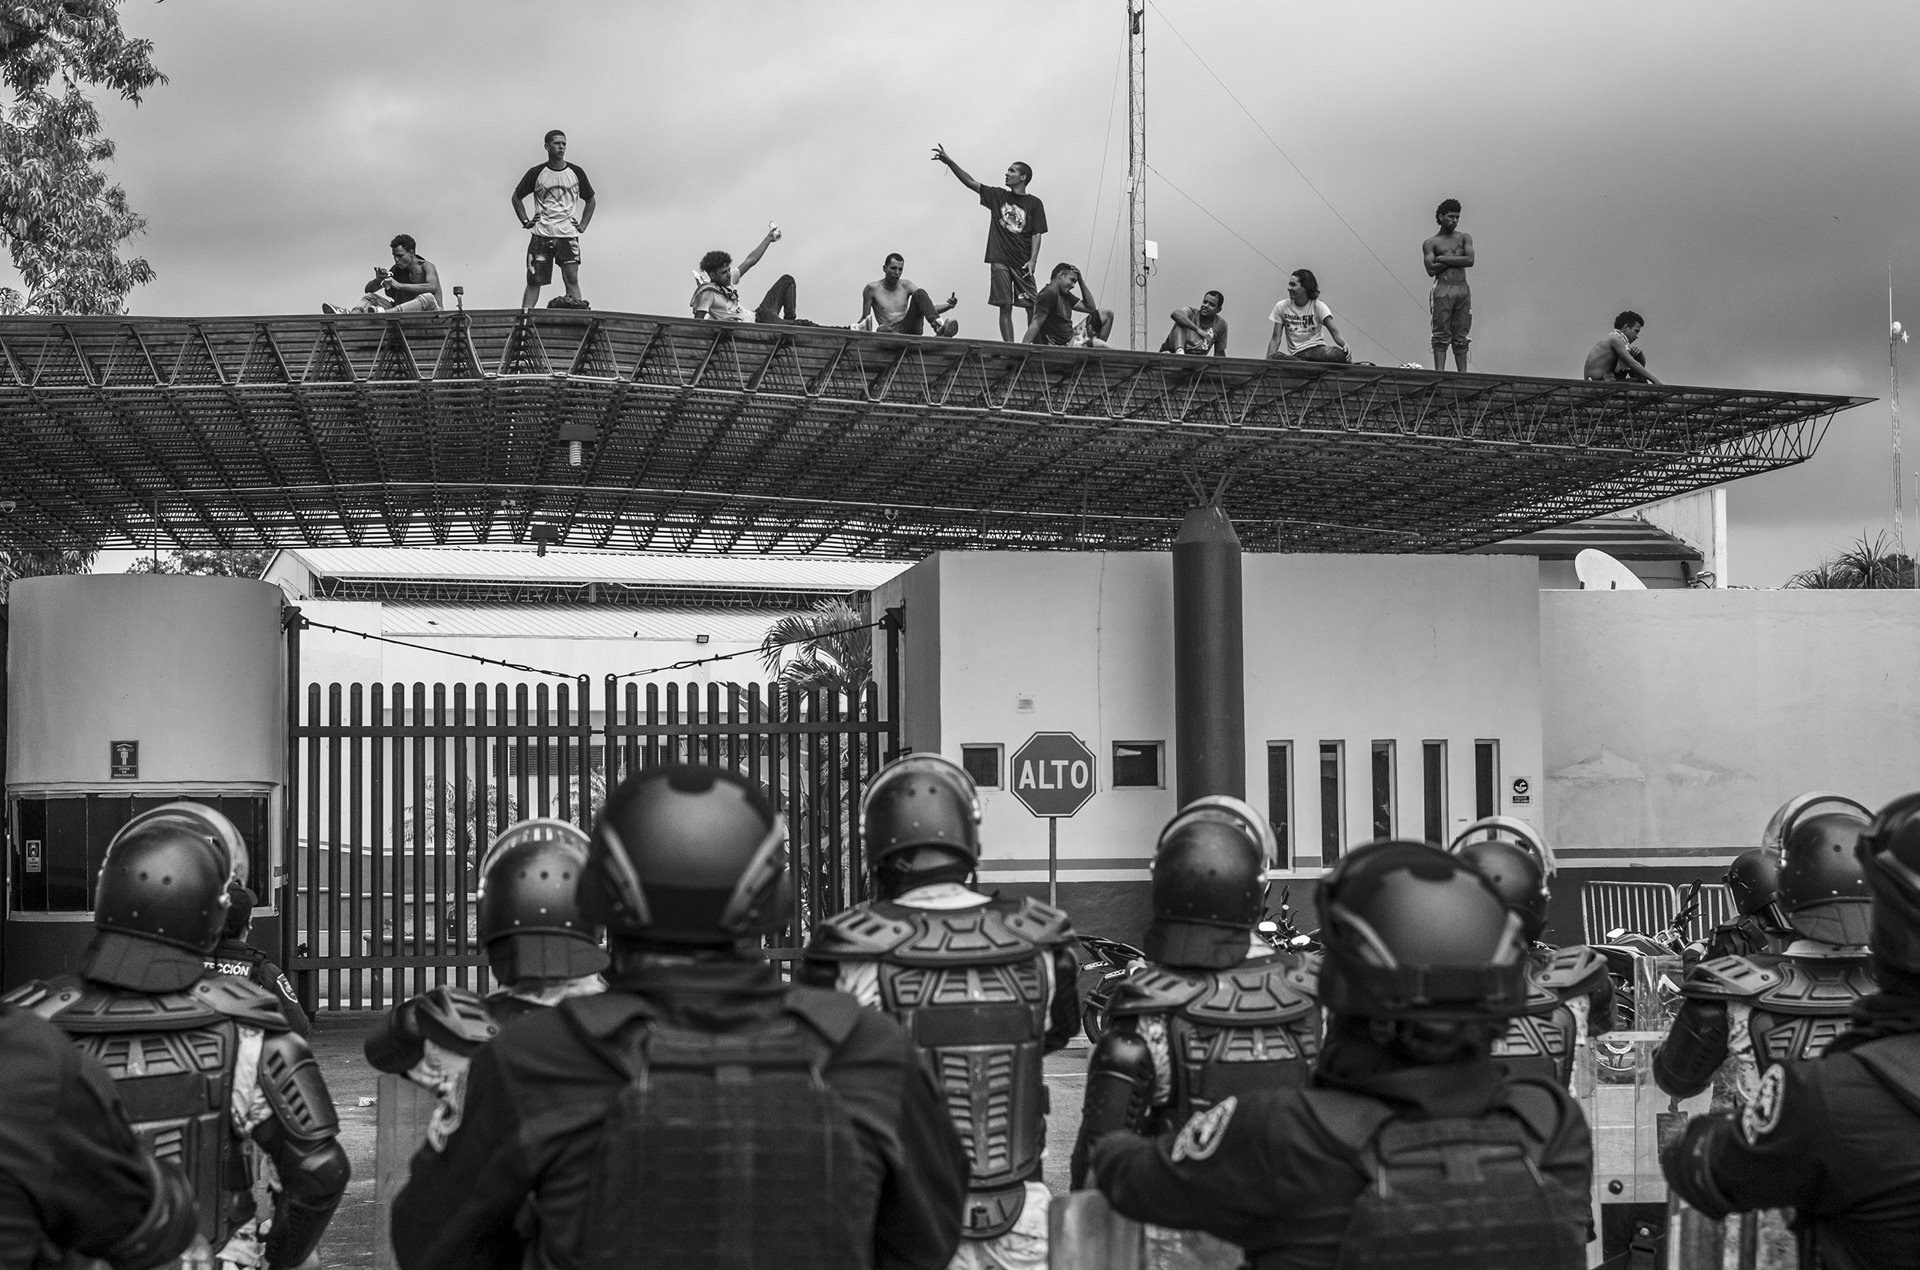 Venezuelan asylum seekers and migrants protest against imprisonment and poor conditions on the roof of the entrance of Siglo XXI, a migratory station in Tapachula, Mexico. NGOs have expressed concern about violations of human rights and compromised legal procedures at the migratory stations, where they are subject to expedited deportations. This group of migrants was sent back to Venezuela on a charter flight.&nbsp;